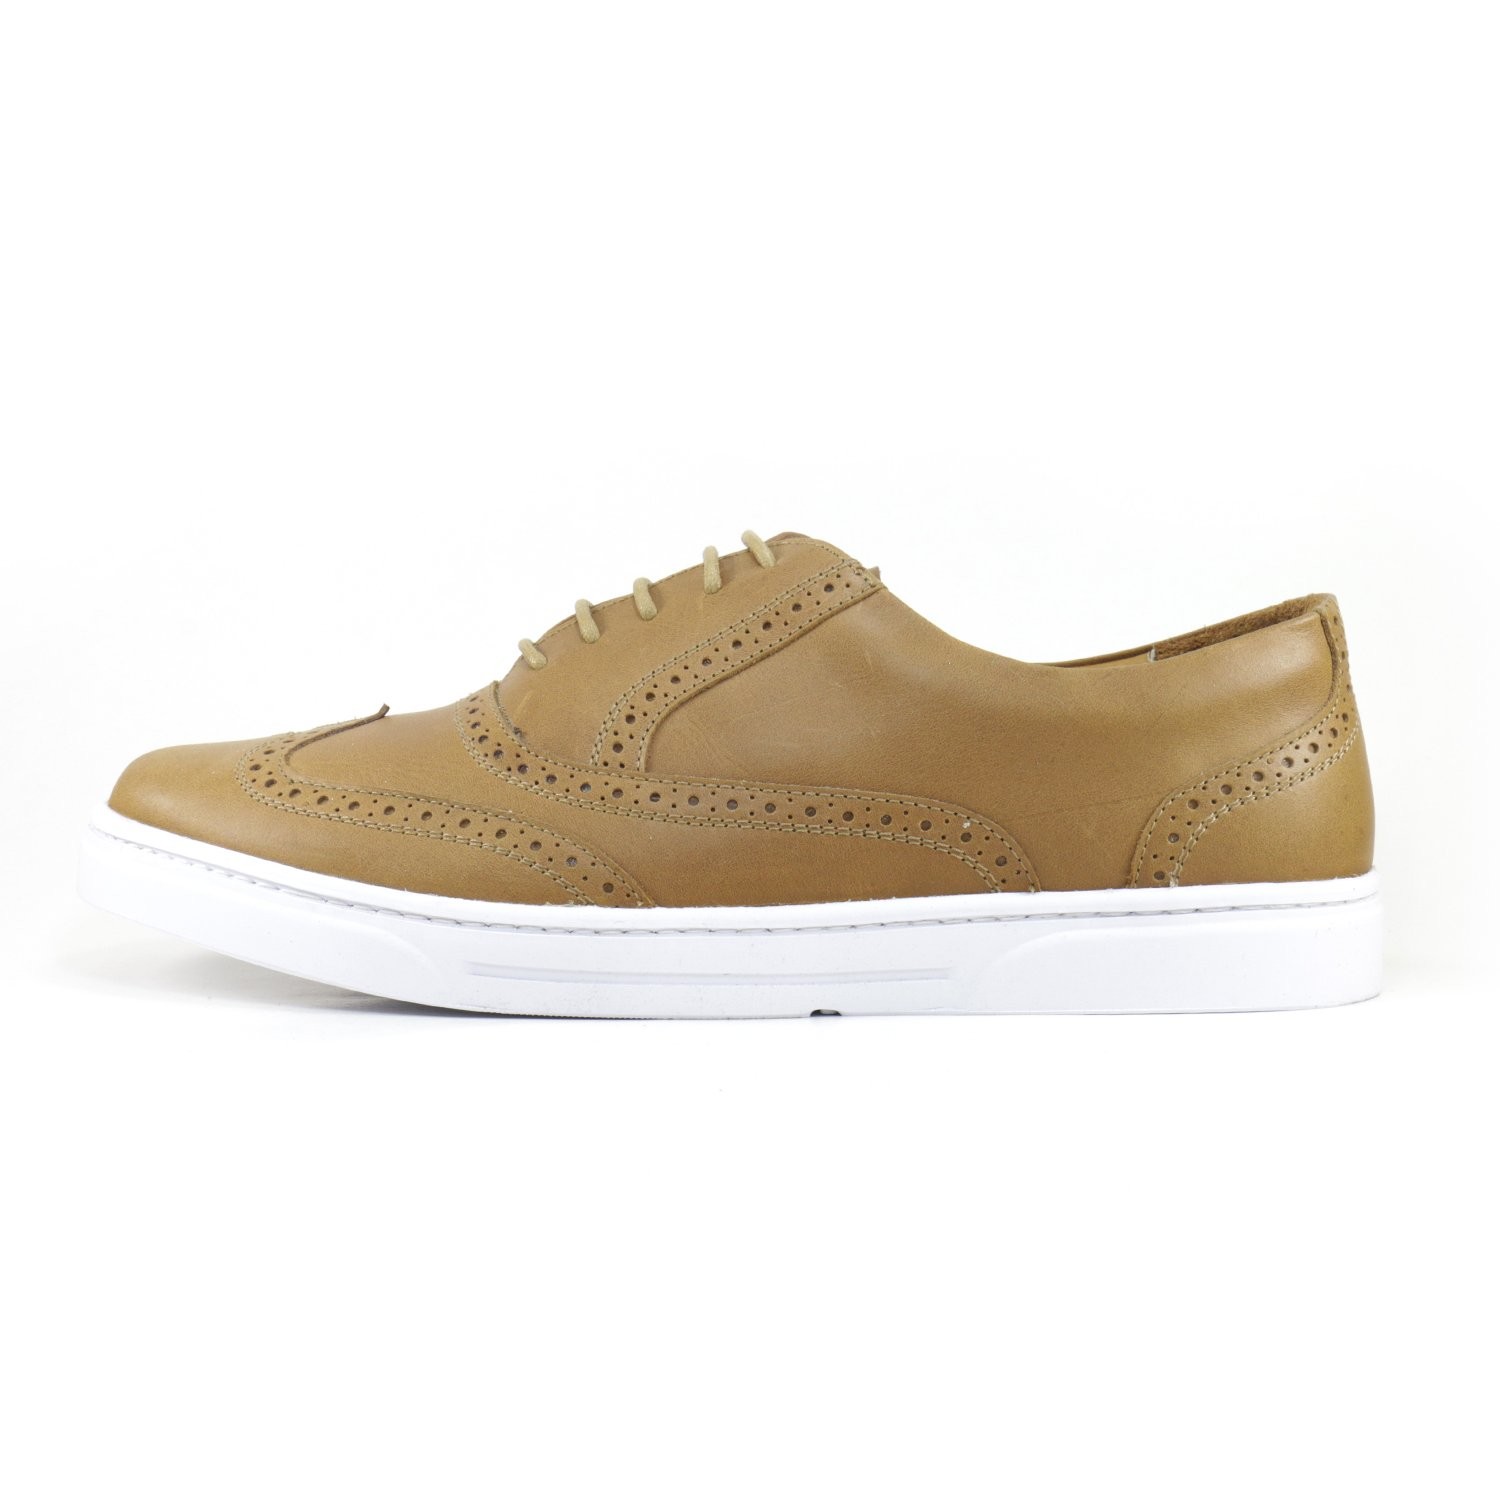 Torino Wingtip Sneakers // Tan (US: 7.5) - Caballero - Touch of Modern